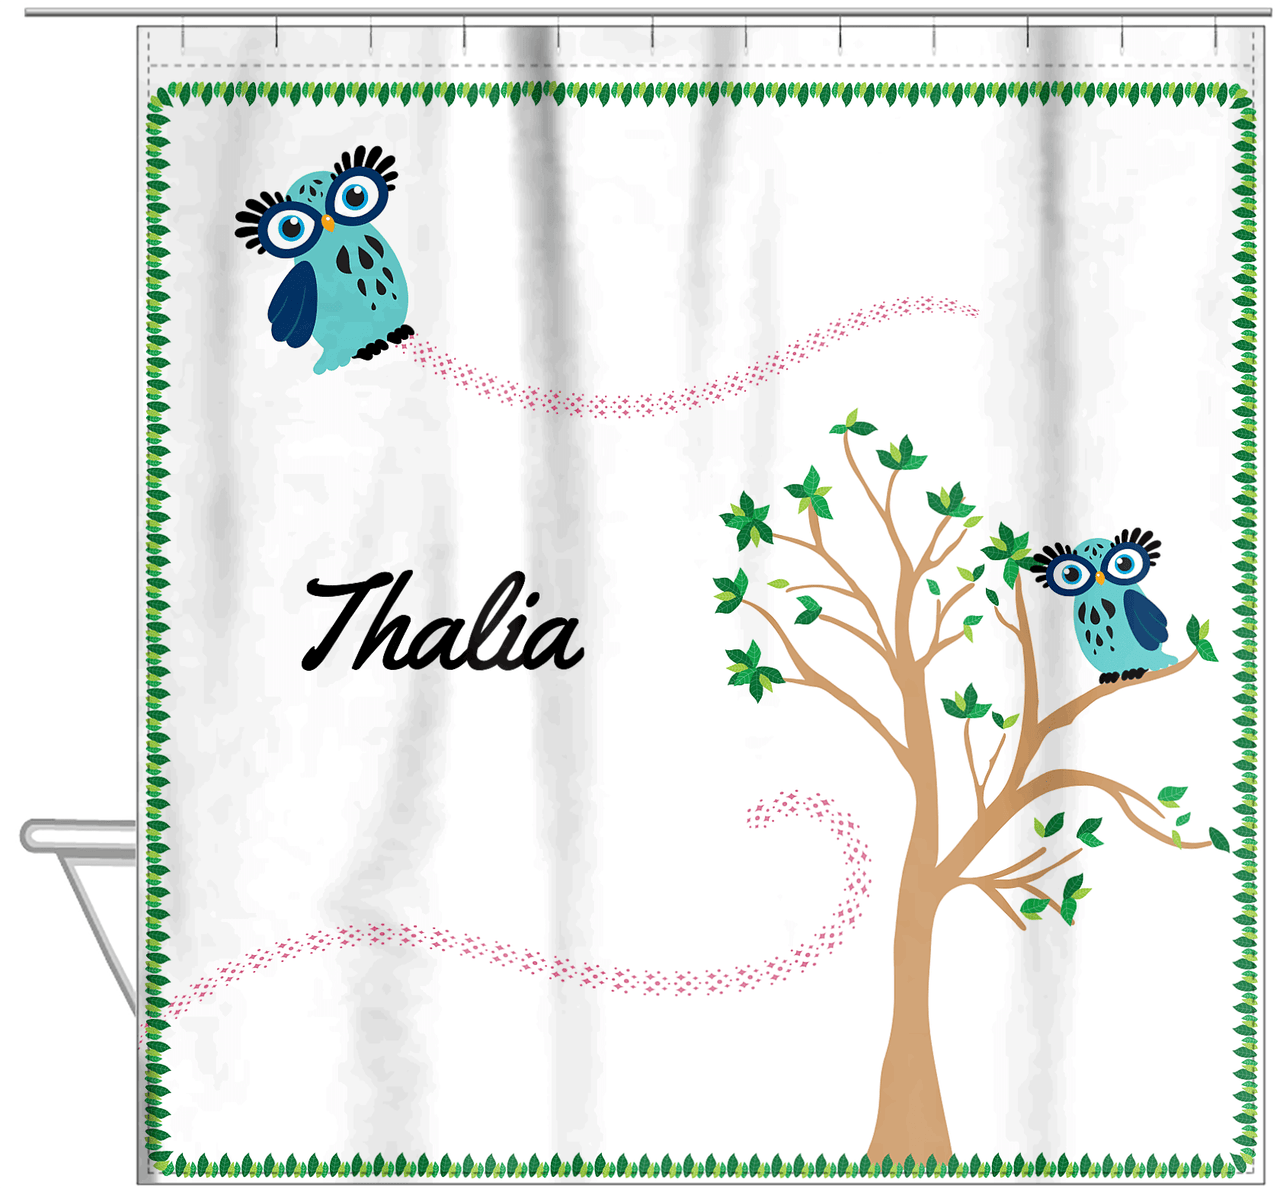 Personalized Owl Shower Curtain VII - Owl 10 - White Background - Hanging View